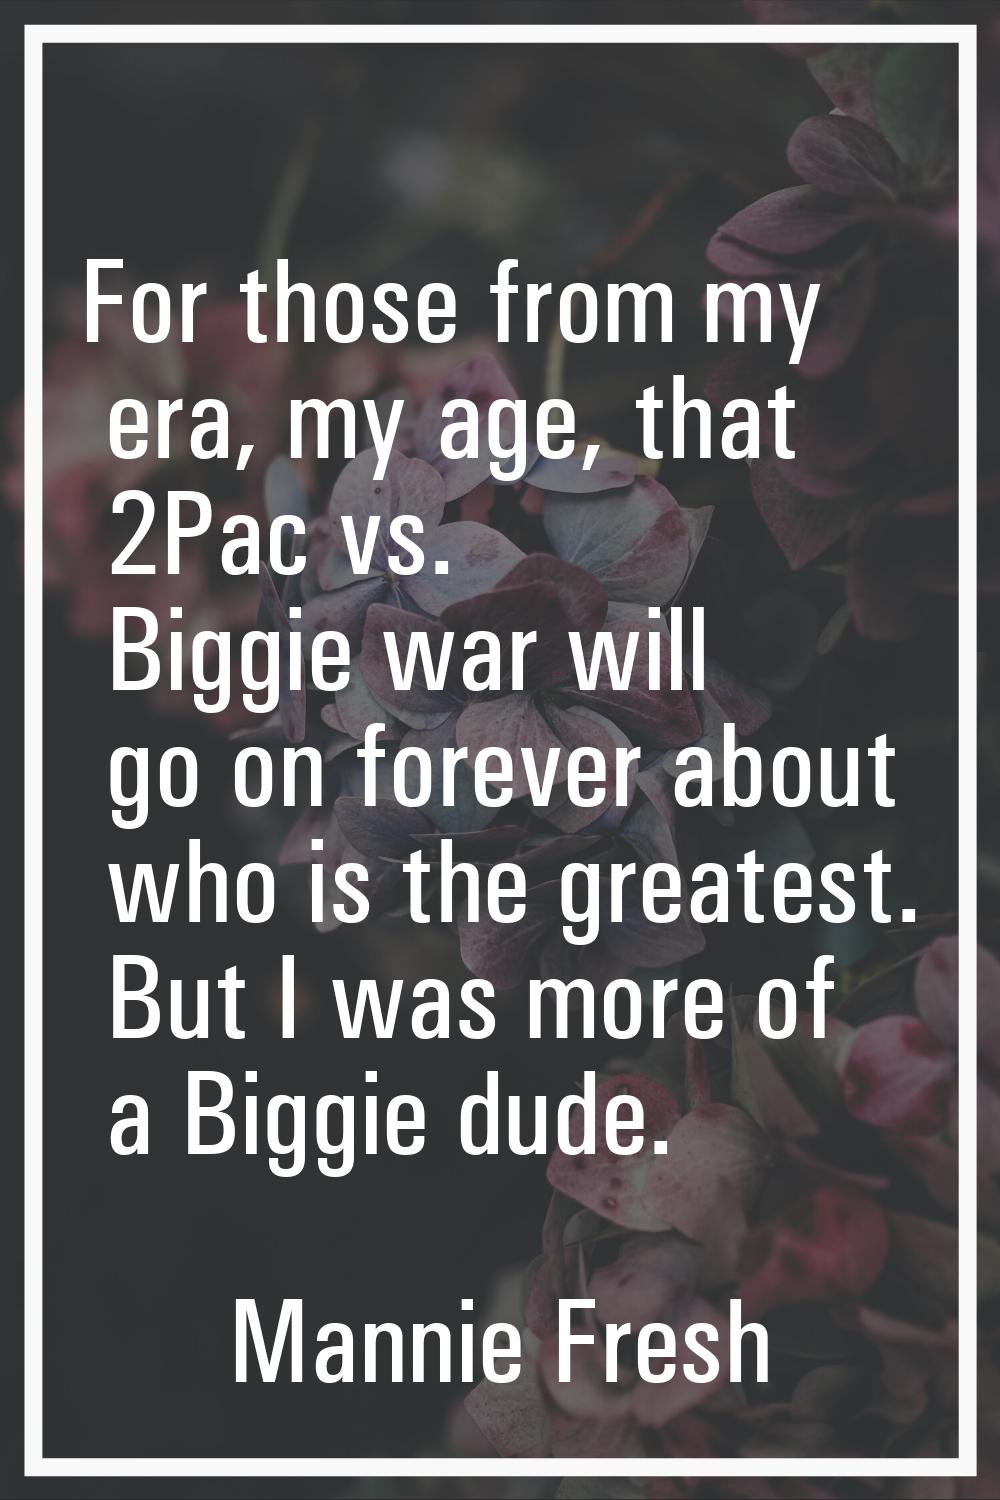 For those from my era, my age, that 2Pac vs. Biggie war will go on forever about who is the greates